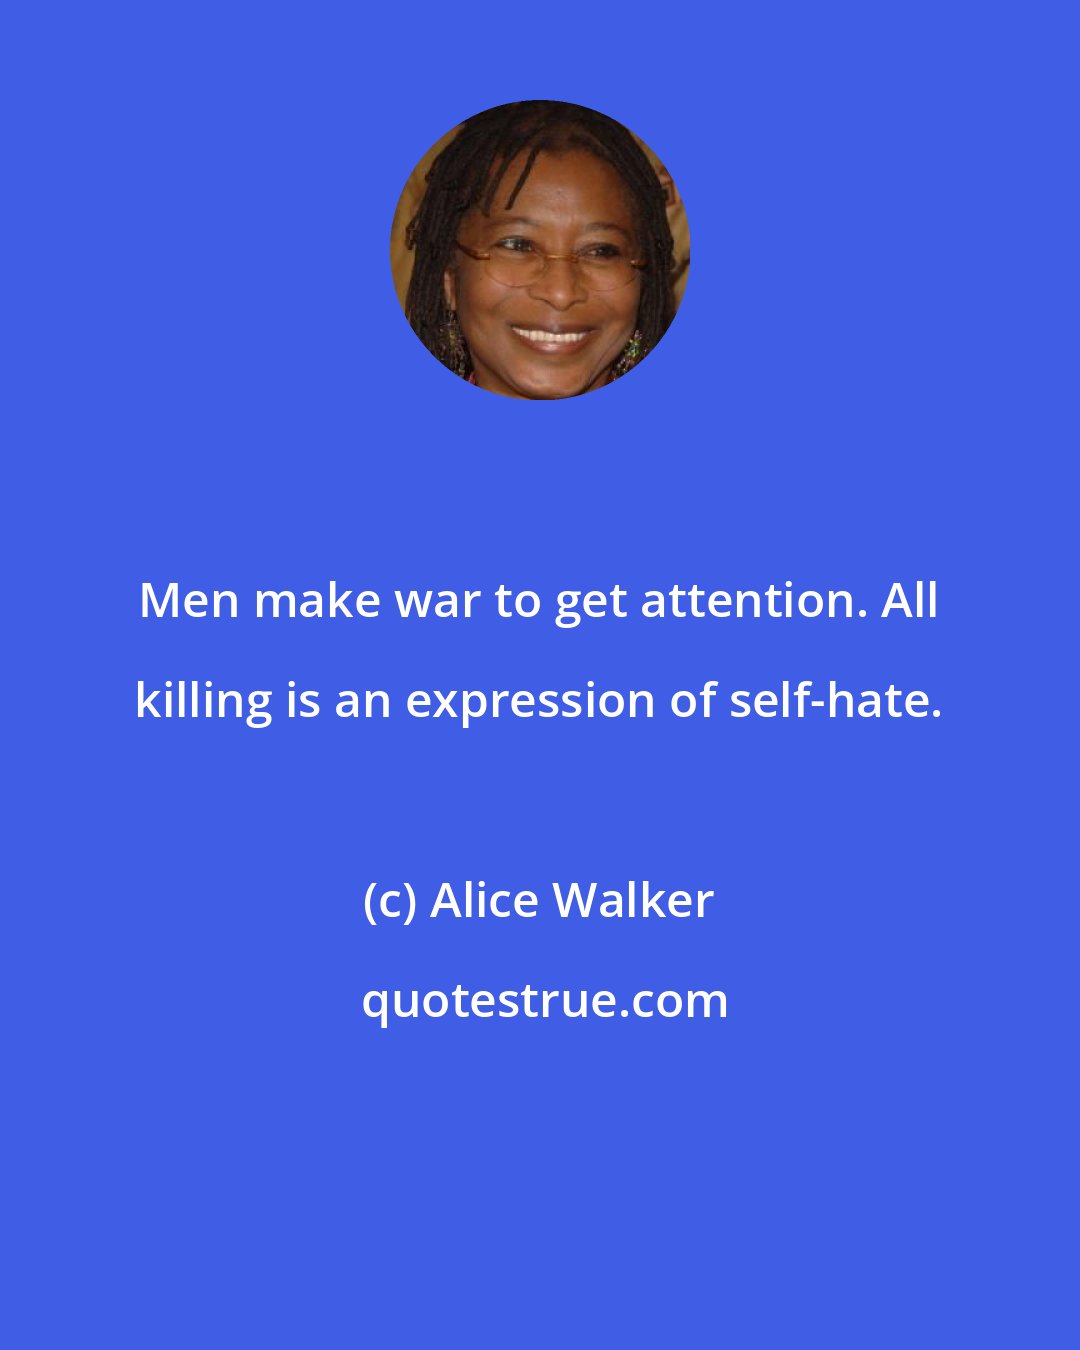 Alice Walker: Men make war to get attention. All killing is an expression of self-hate.